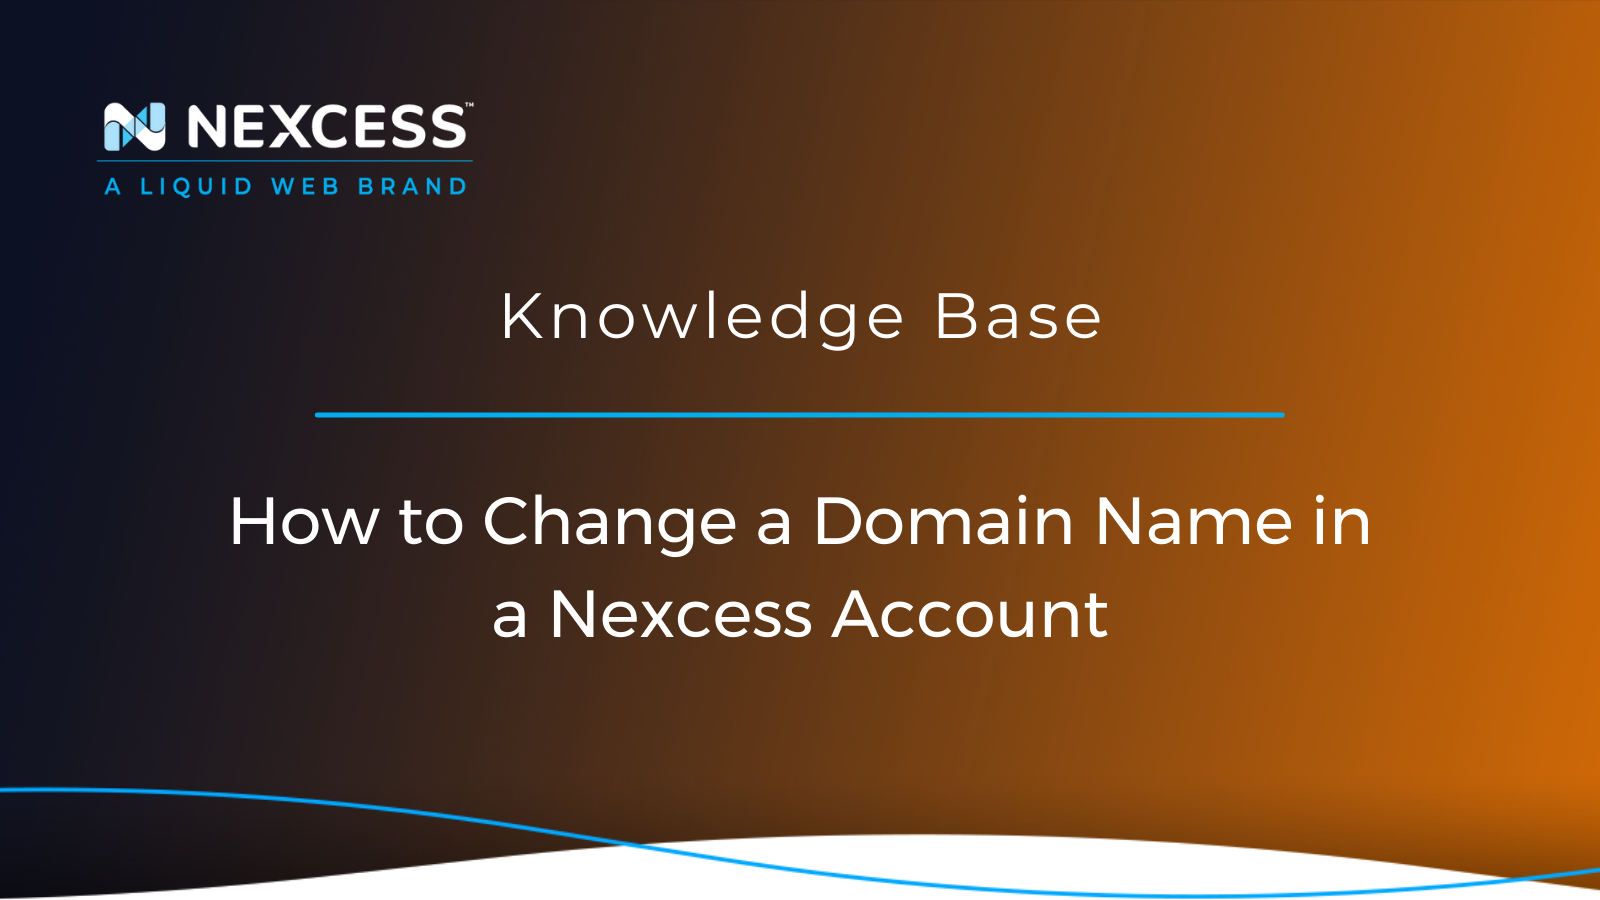 How to Change a Domain Name in a Nexcess Account